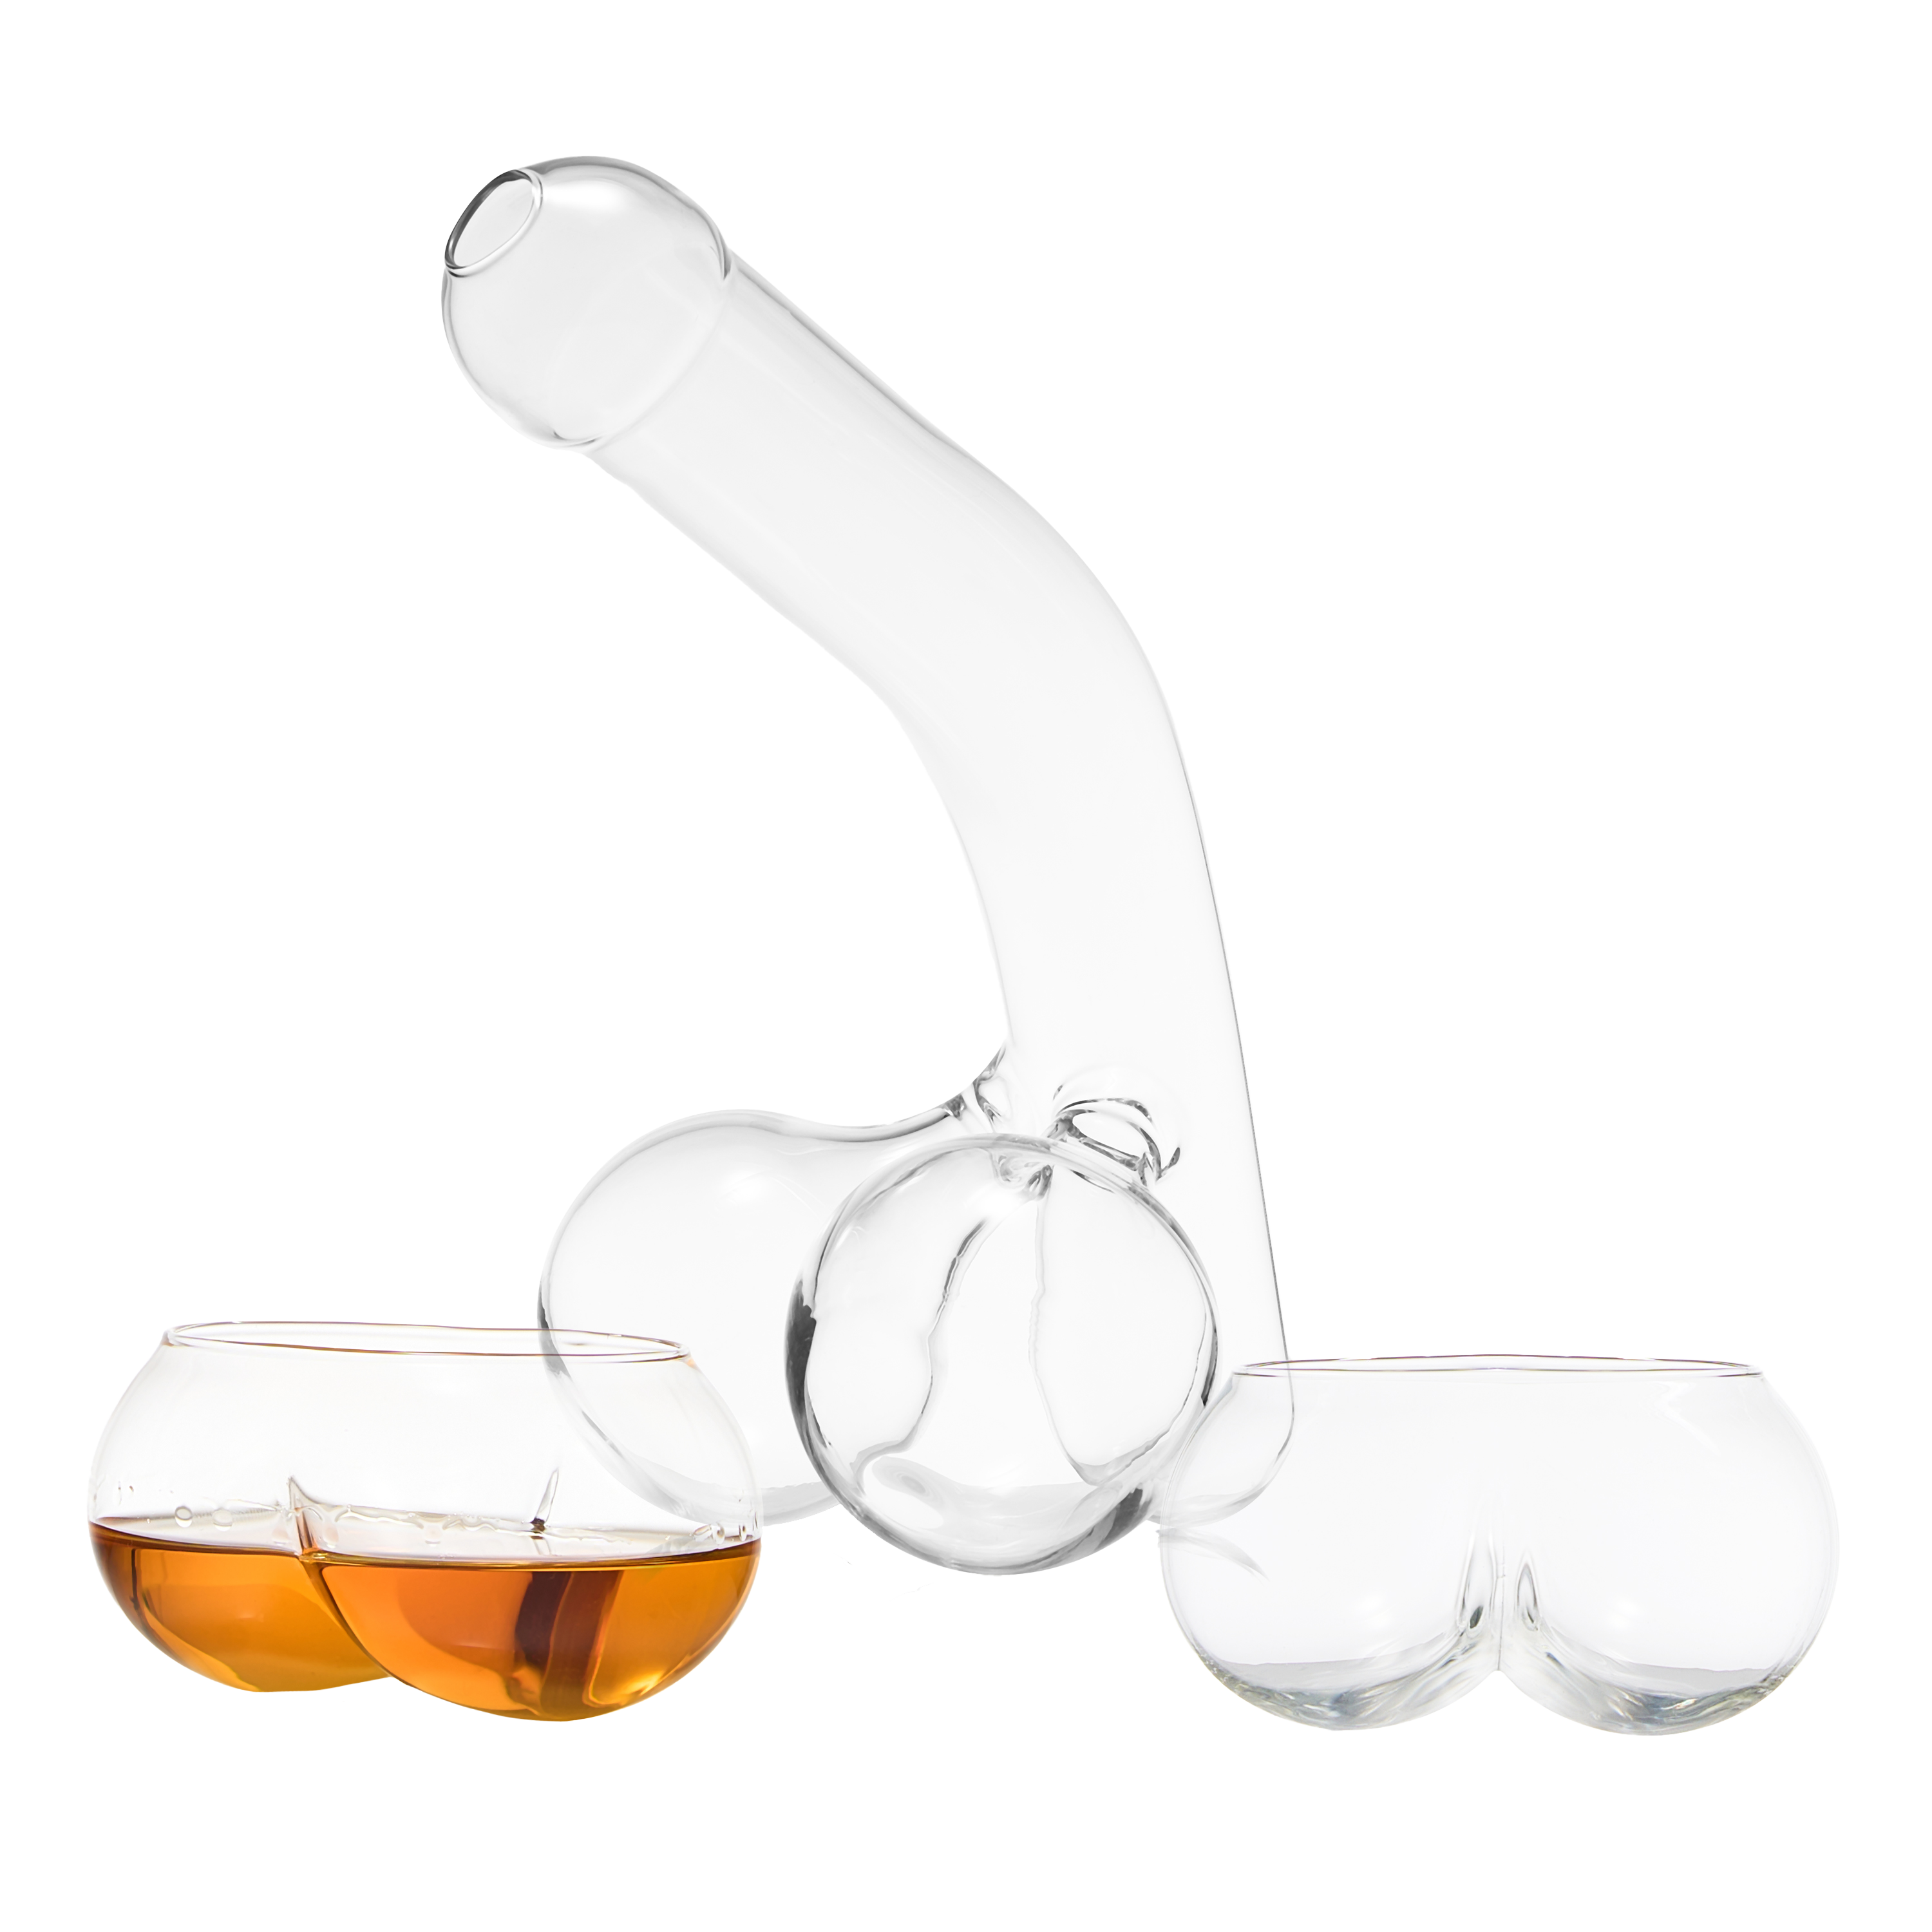 Penis Whiskey Decanter Bottle With Two Whiskey Glasses - Unique